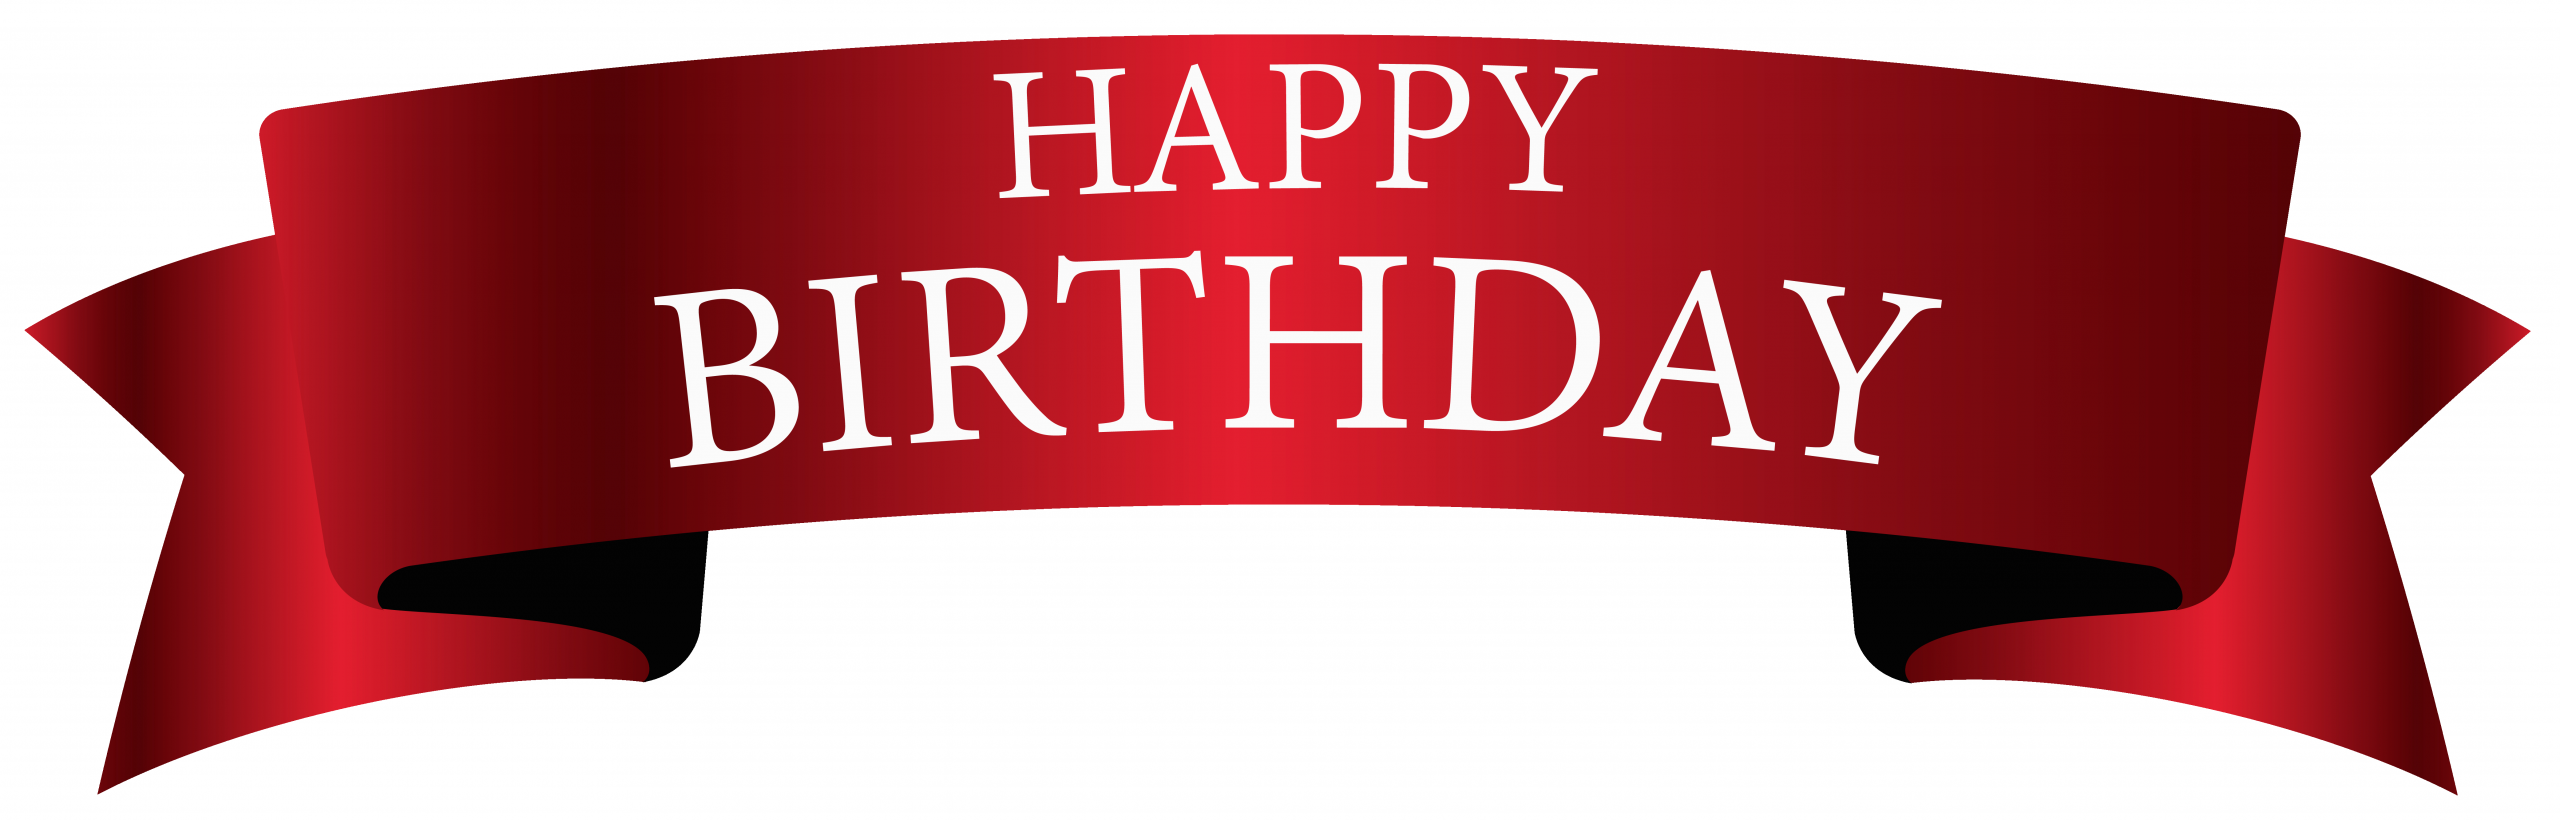 red birthday banner png clipart image